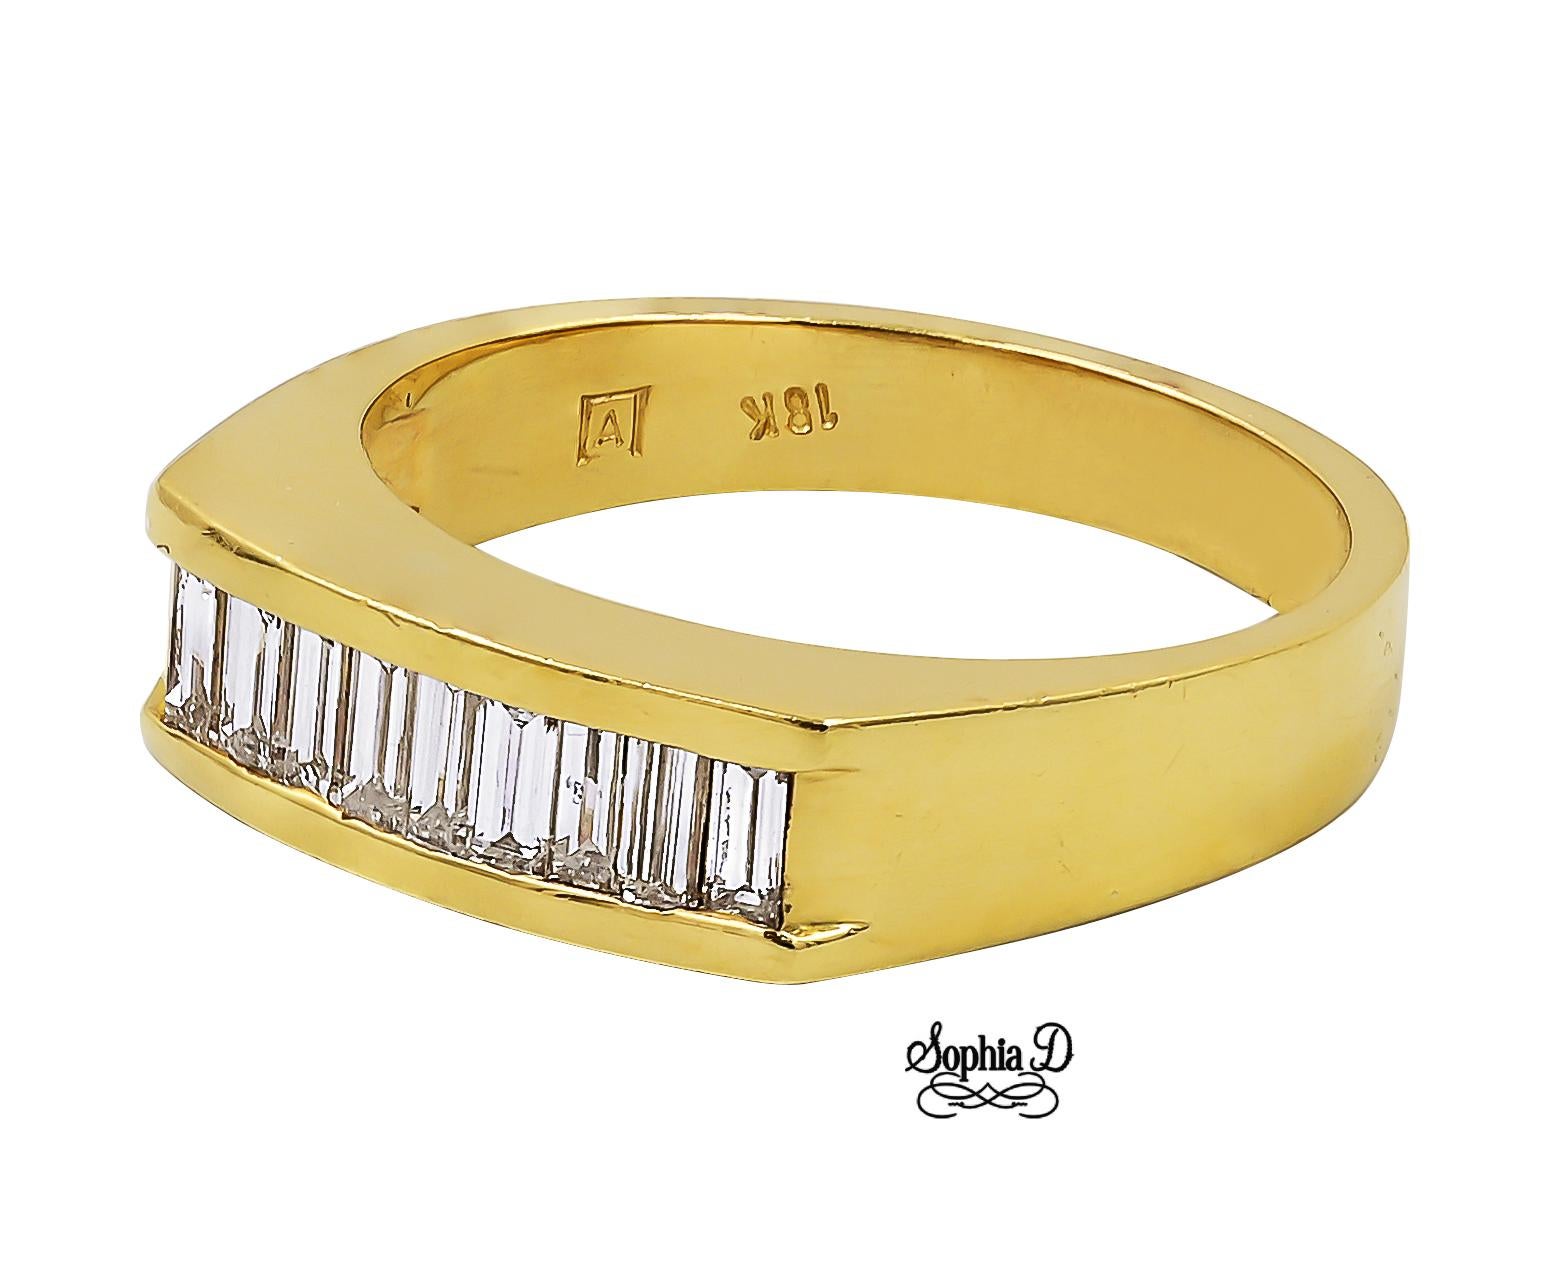 18K yellow gold ring with emerald cut diamonds.

Sophia D by Joseph Dardashti LTD has been known worldwide for 35 years and are inspired by classic Art Deco design that merges with modern manufacturing techniques.  